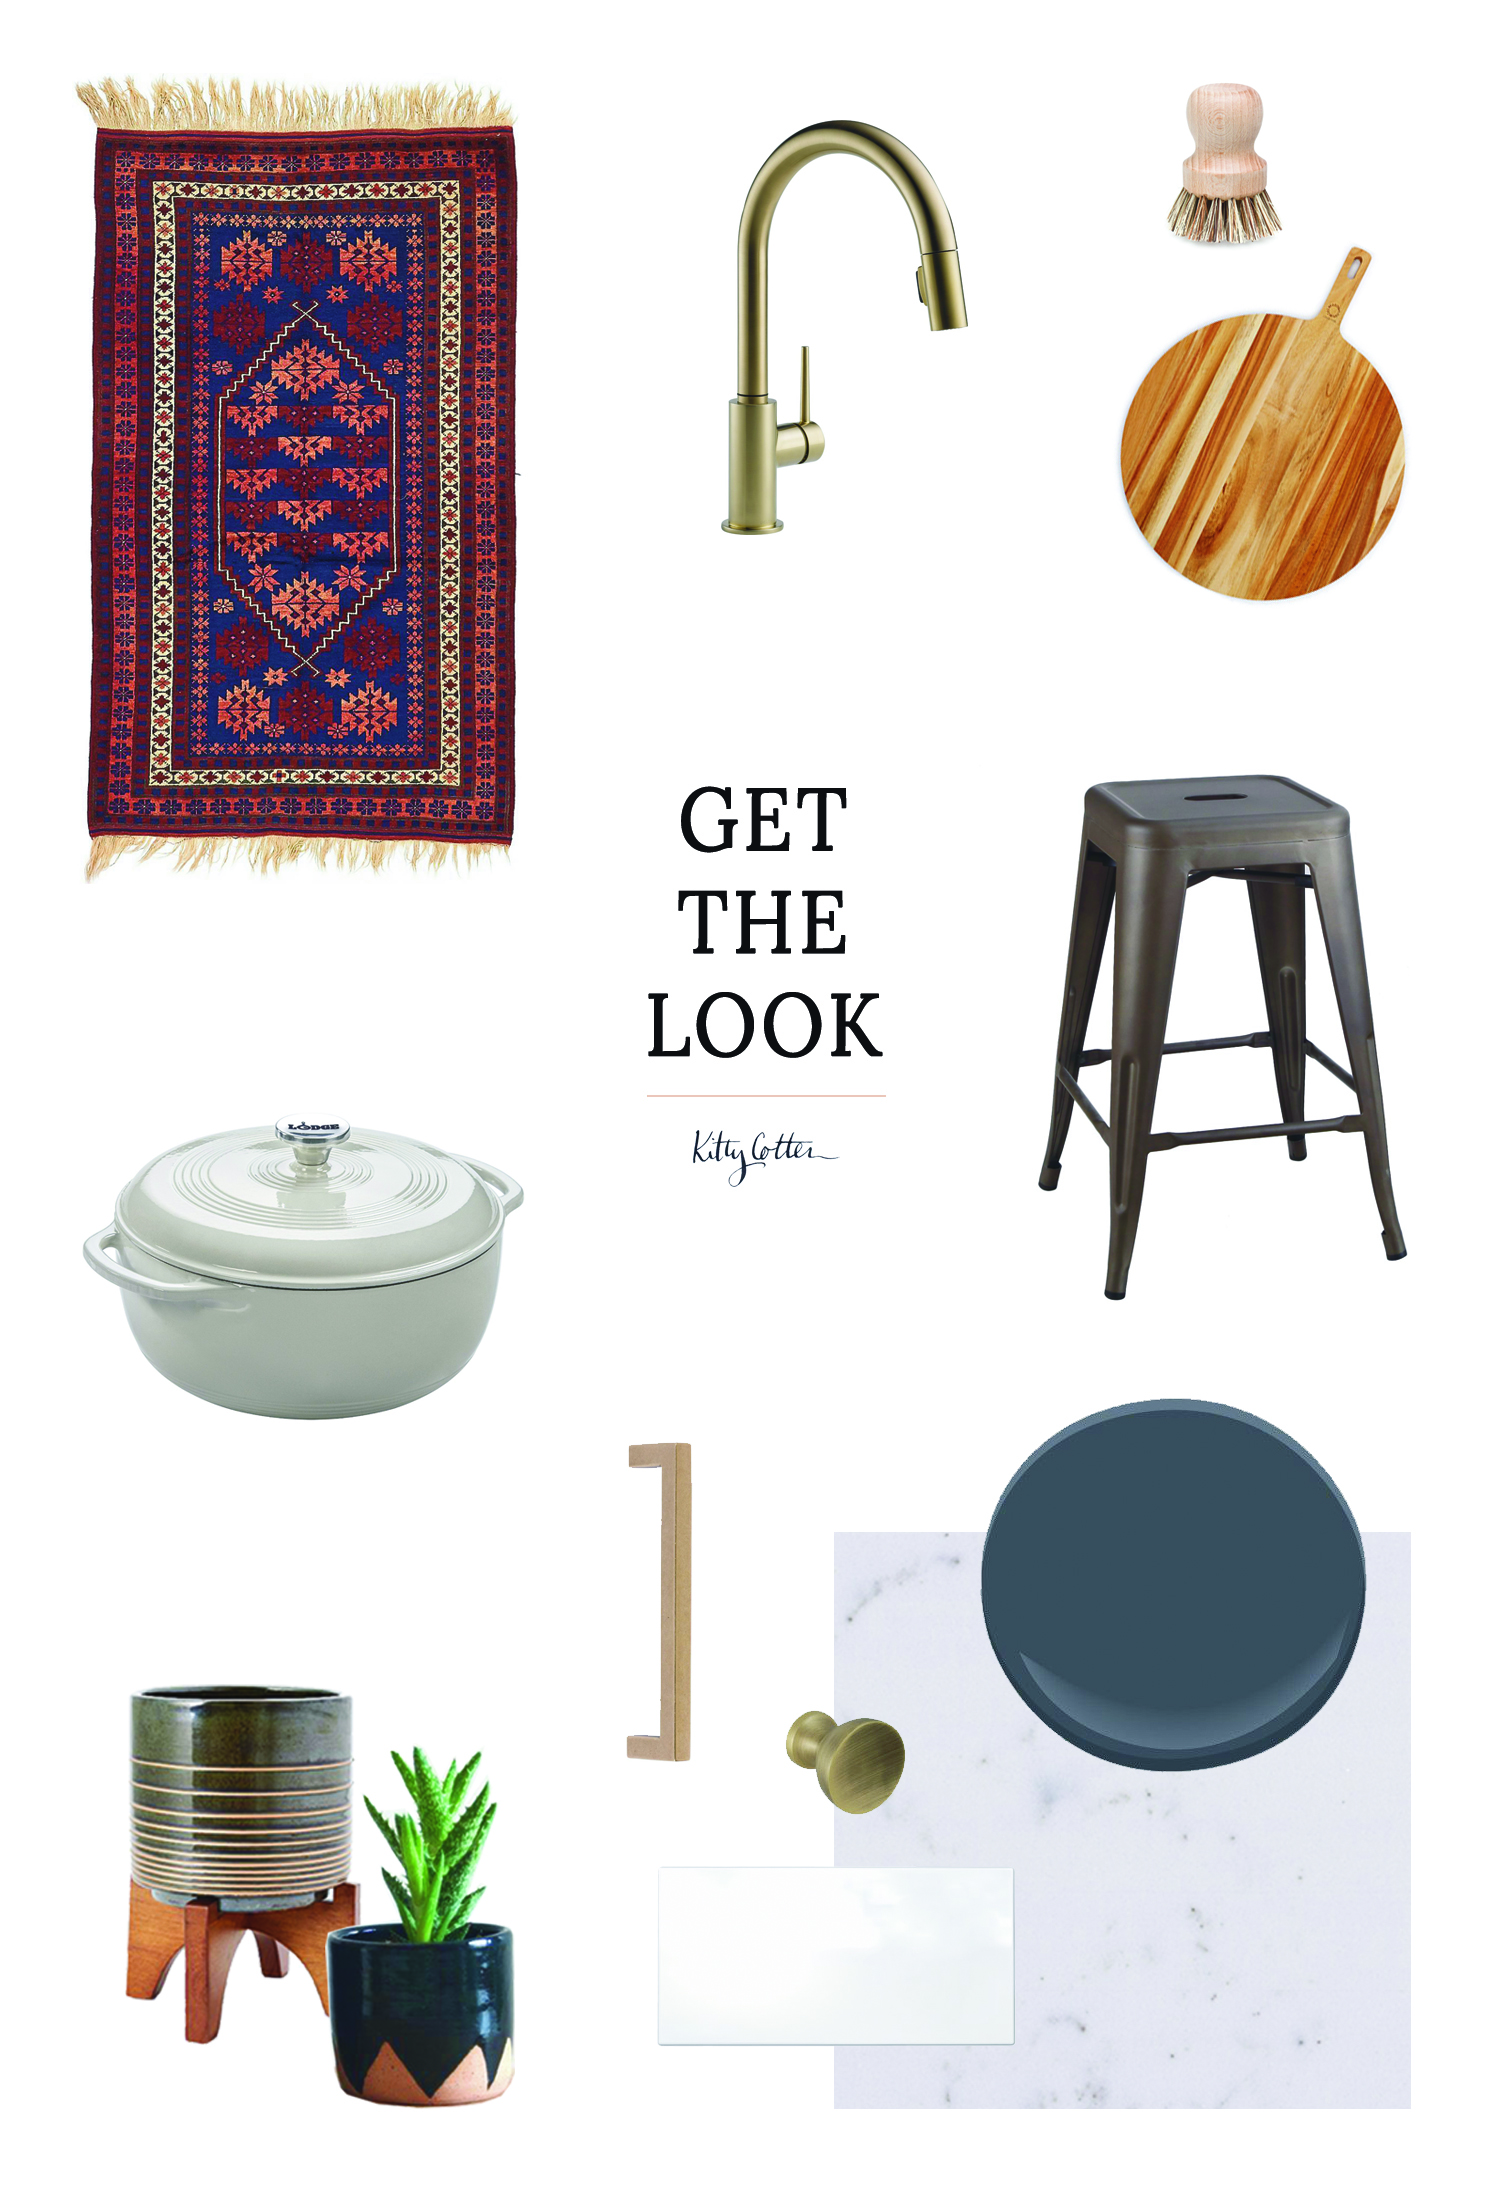 Get the Look | Kitty Cotten's Kitchen